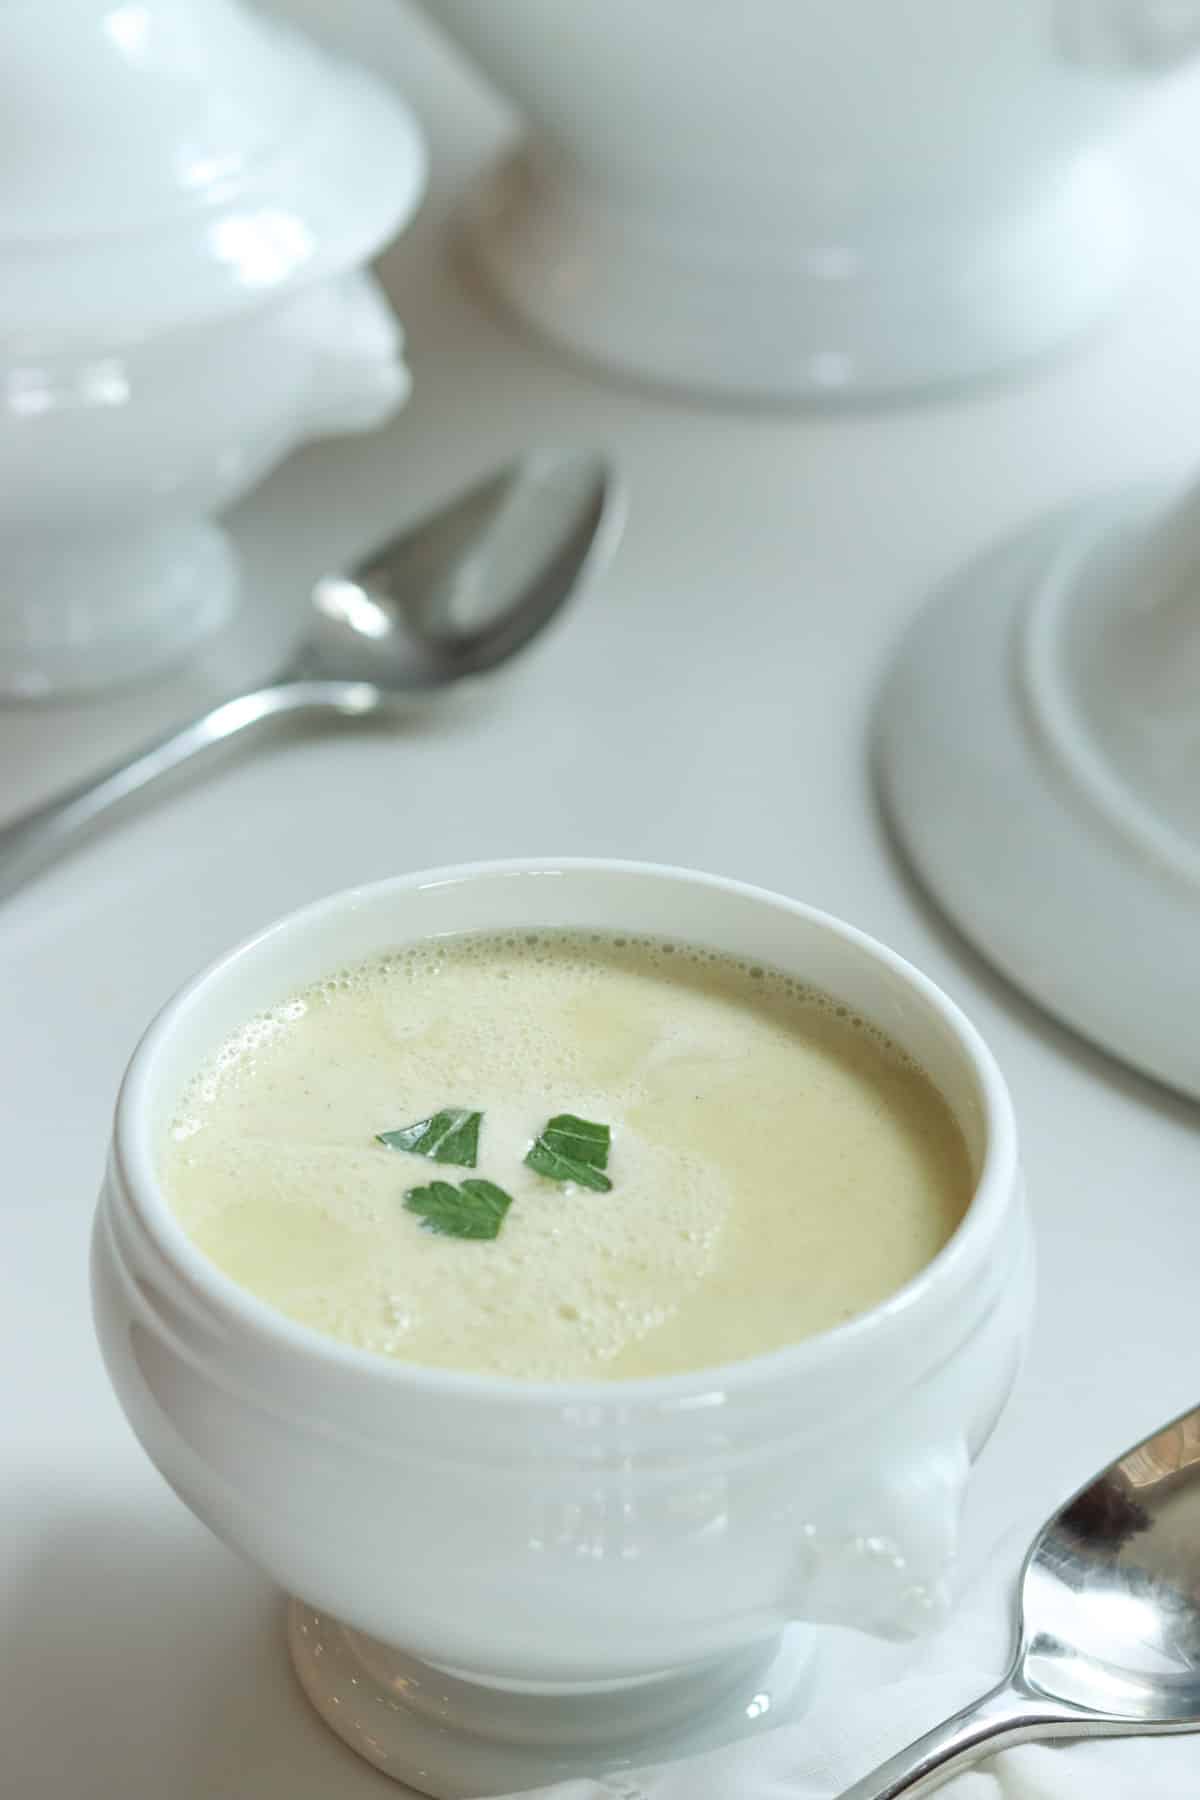 Julia Child's French Garlic Soup Aïgo Bouido in a white bowl with green parsley flakes on top